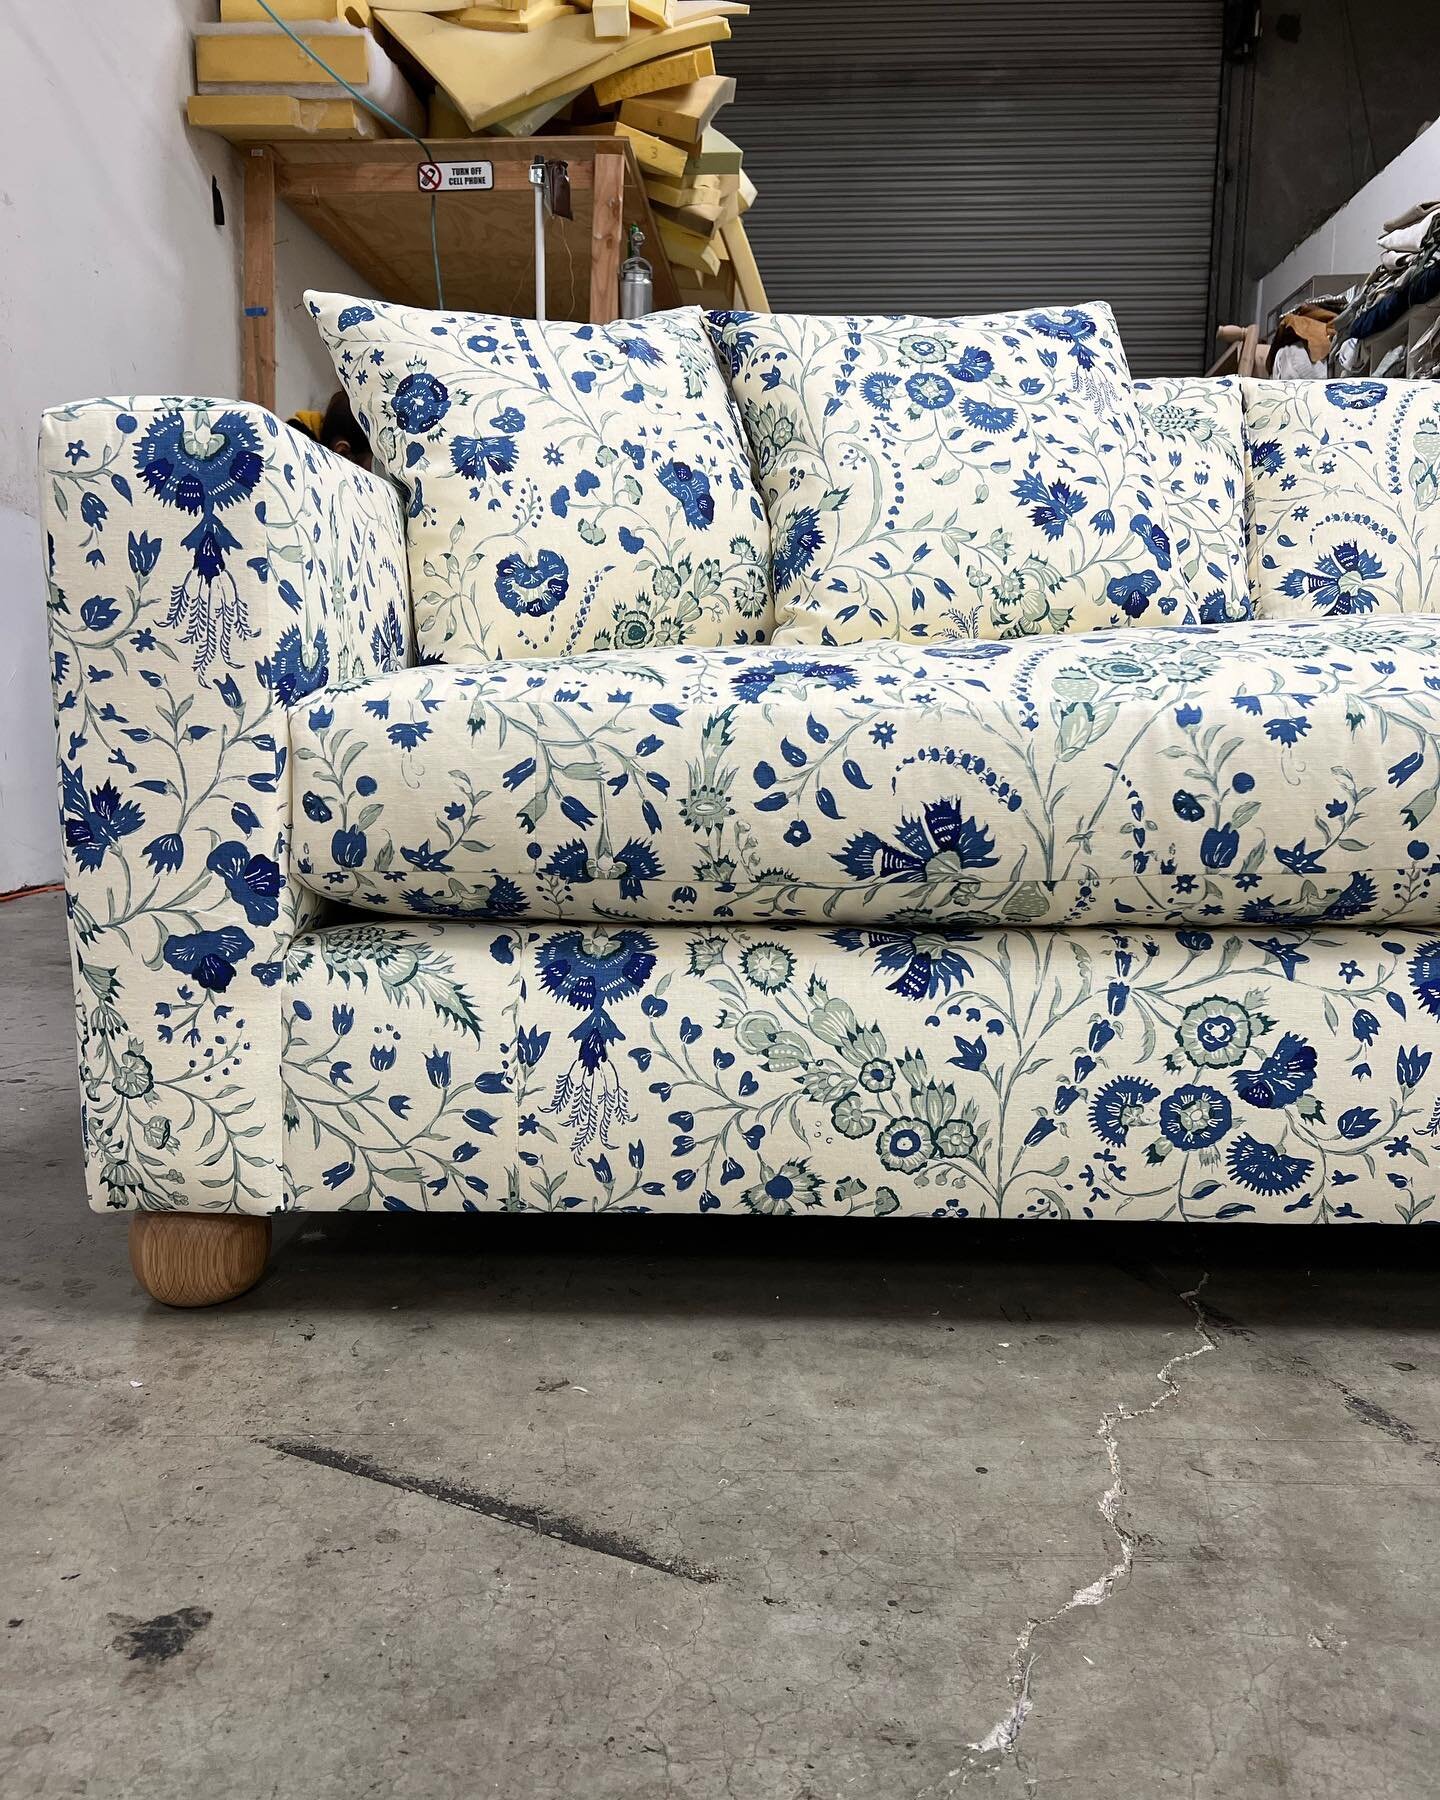 This beauty of a sectional brightened up the workroom and we are all sad to see if head out of state for the super creative team at @emilyjanakinteriors 
The fabric, the bun feet, just everything!